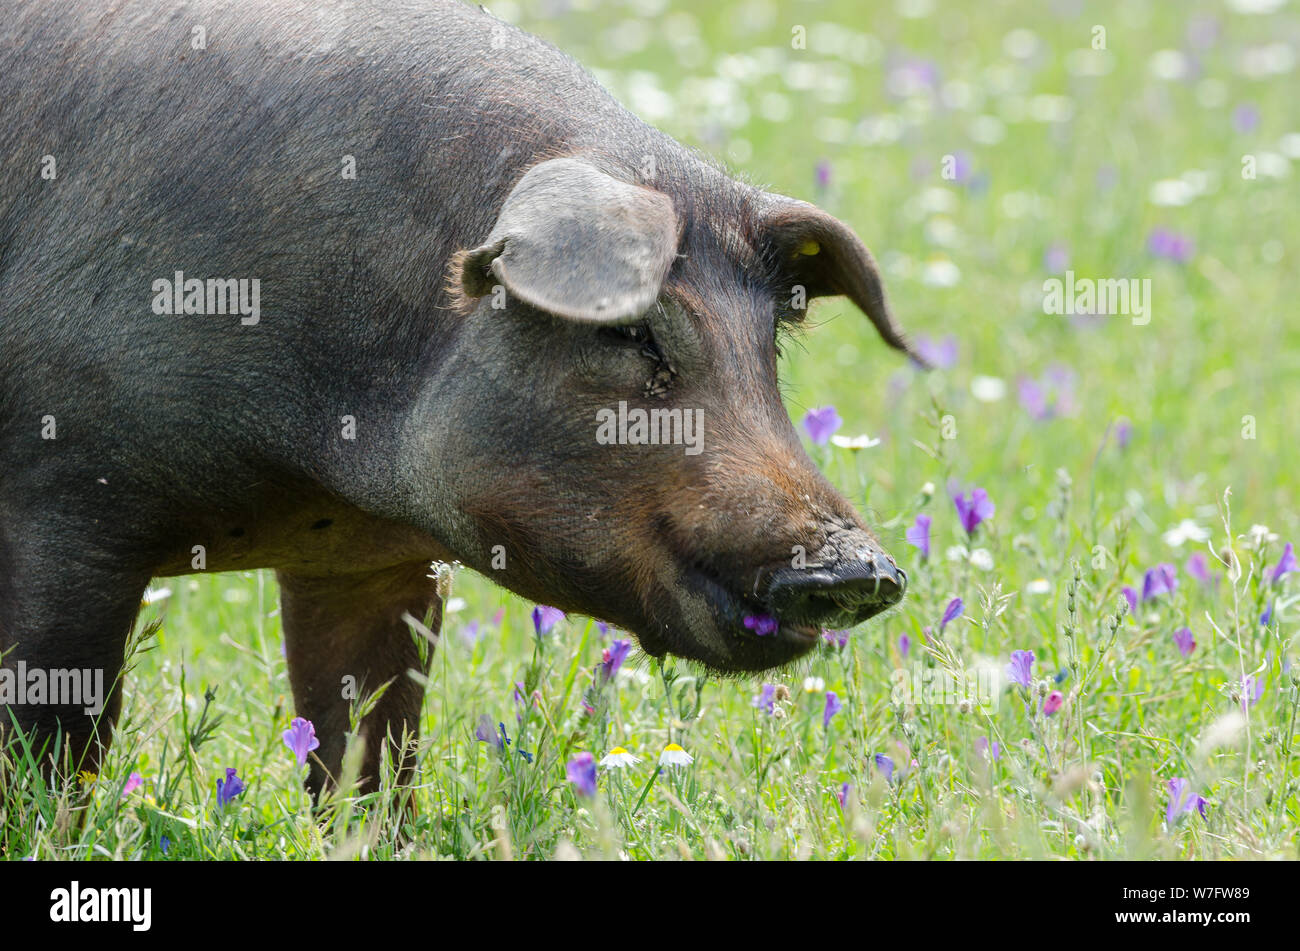 portrait of Iberian pig herd (pata negra) eating in a flower field Stock Photo